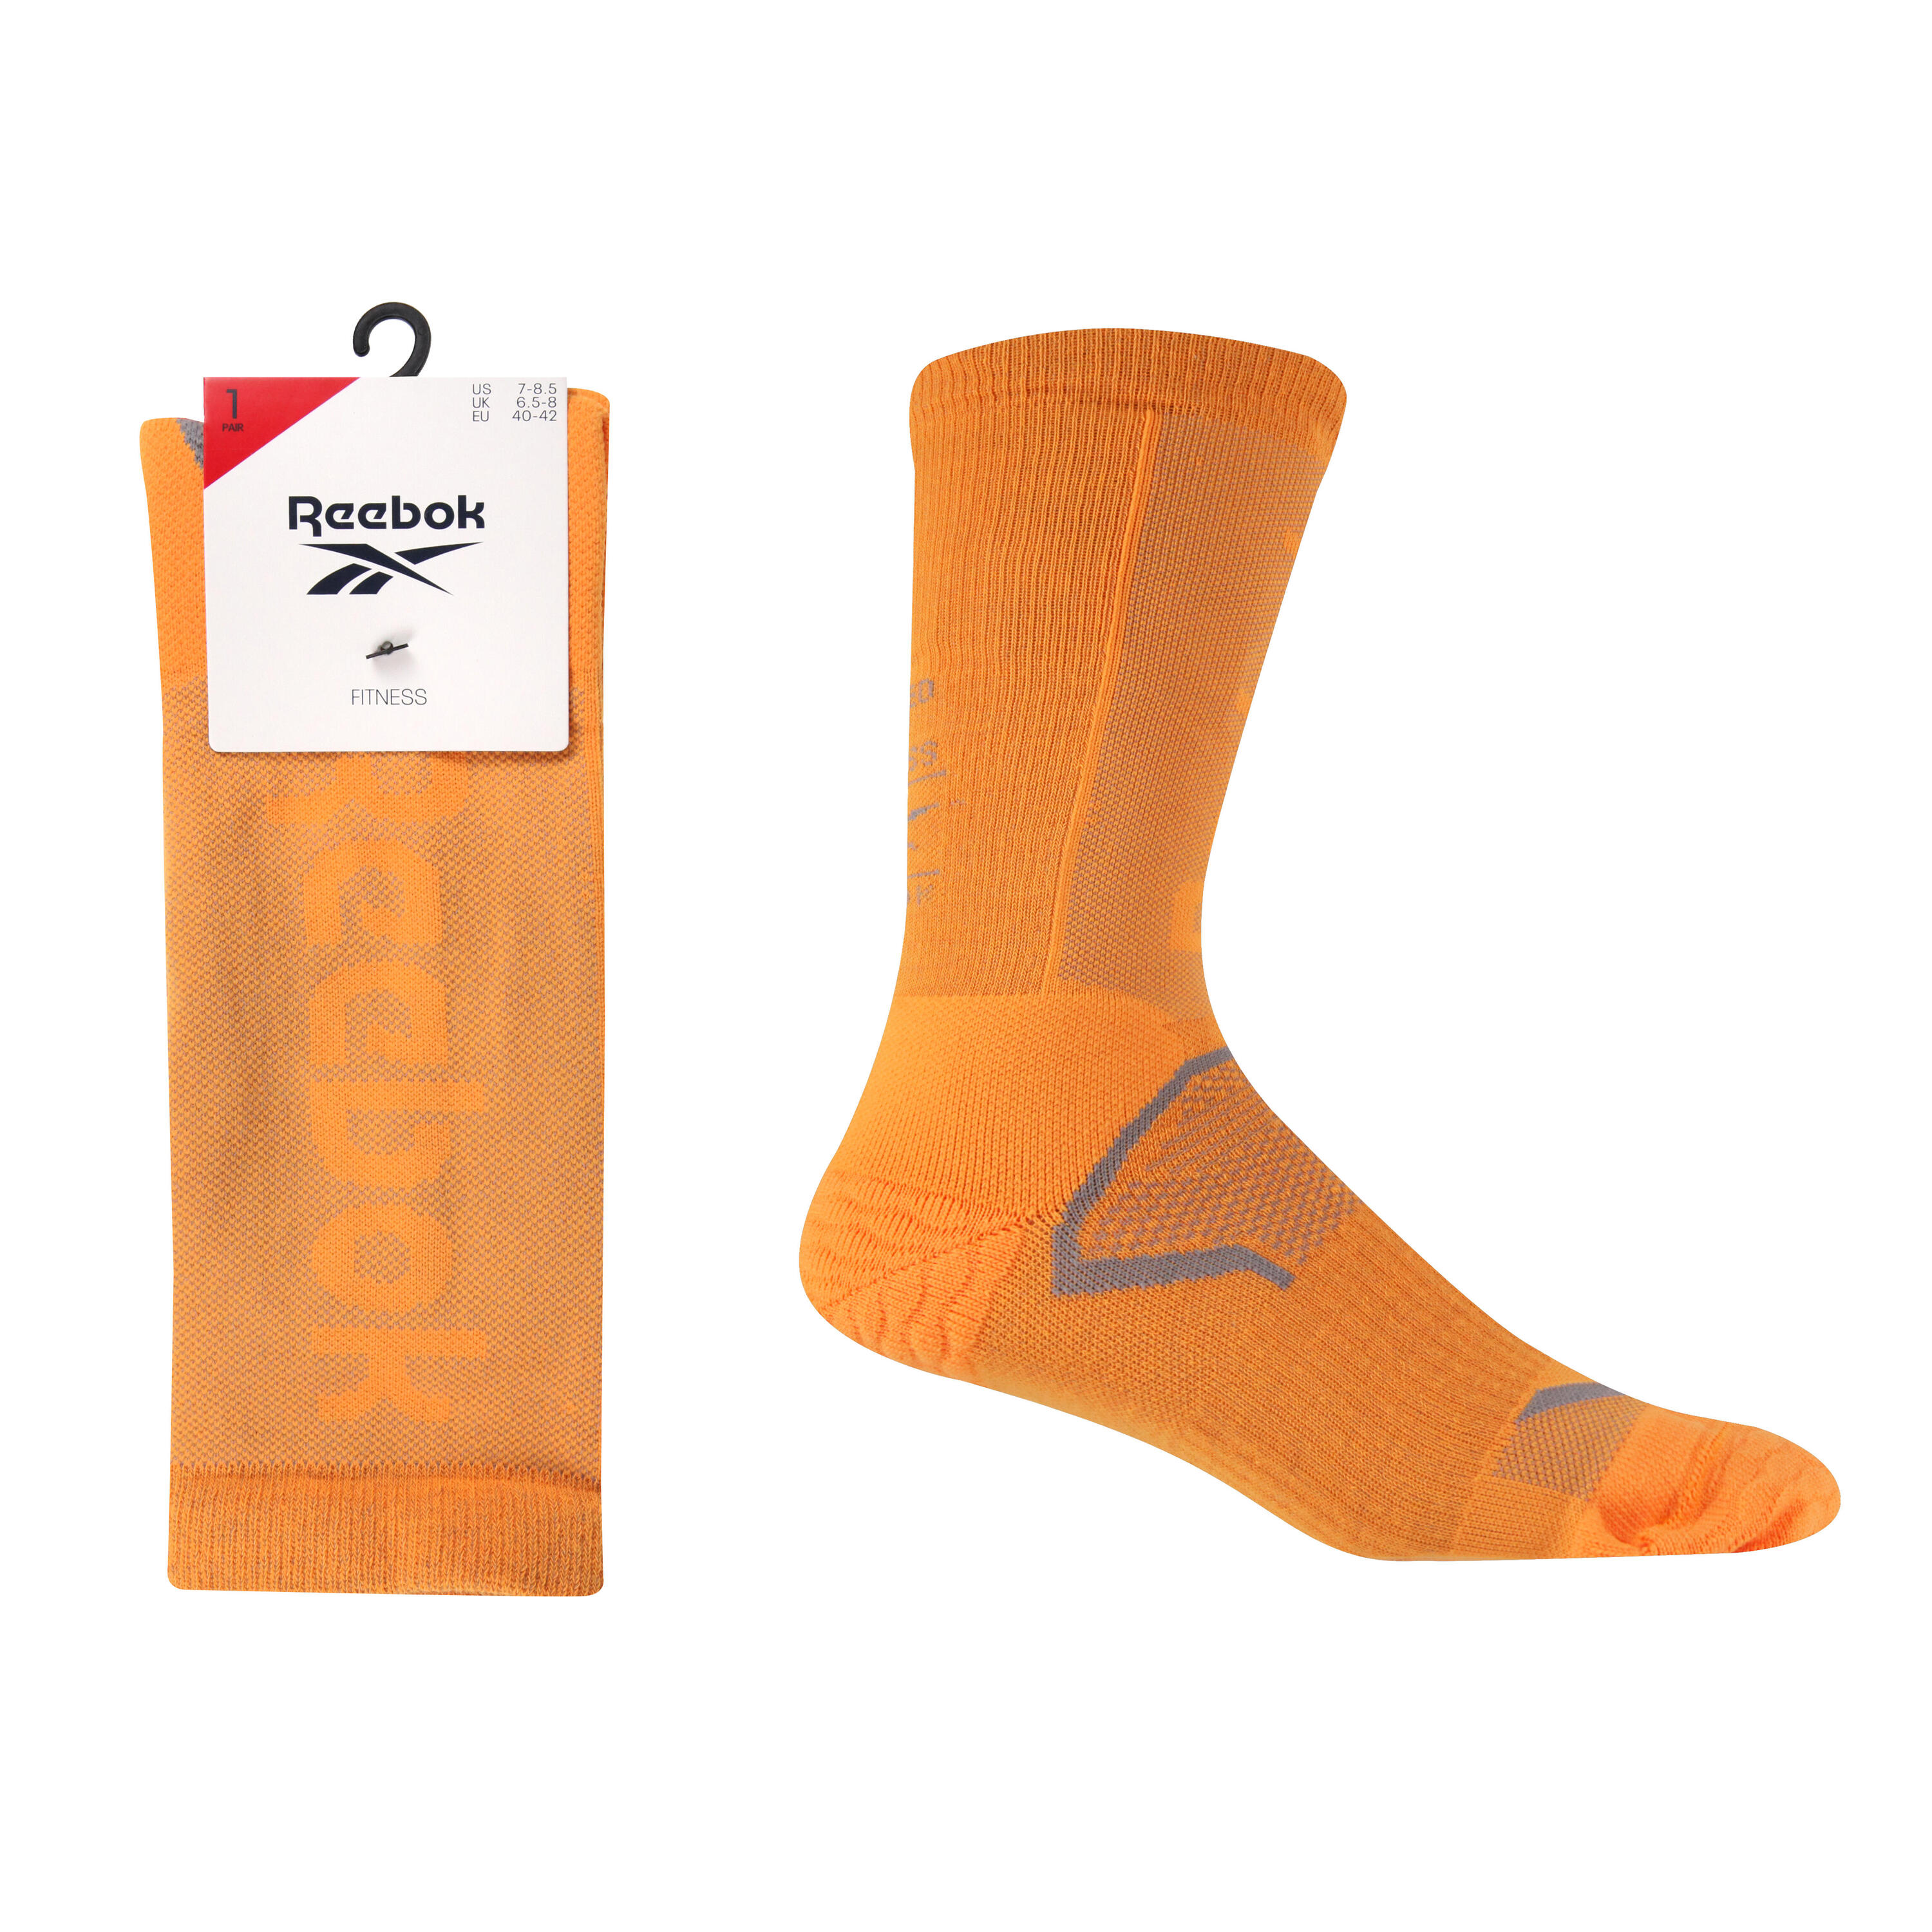 REEBOK 1 Pk Longer Length Socks With Full Elastic Compession, Mesh Panels, Arch Support